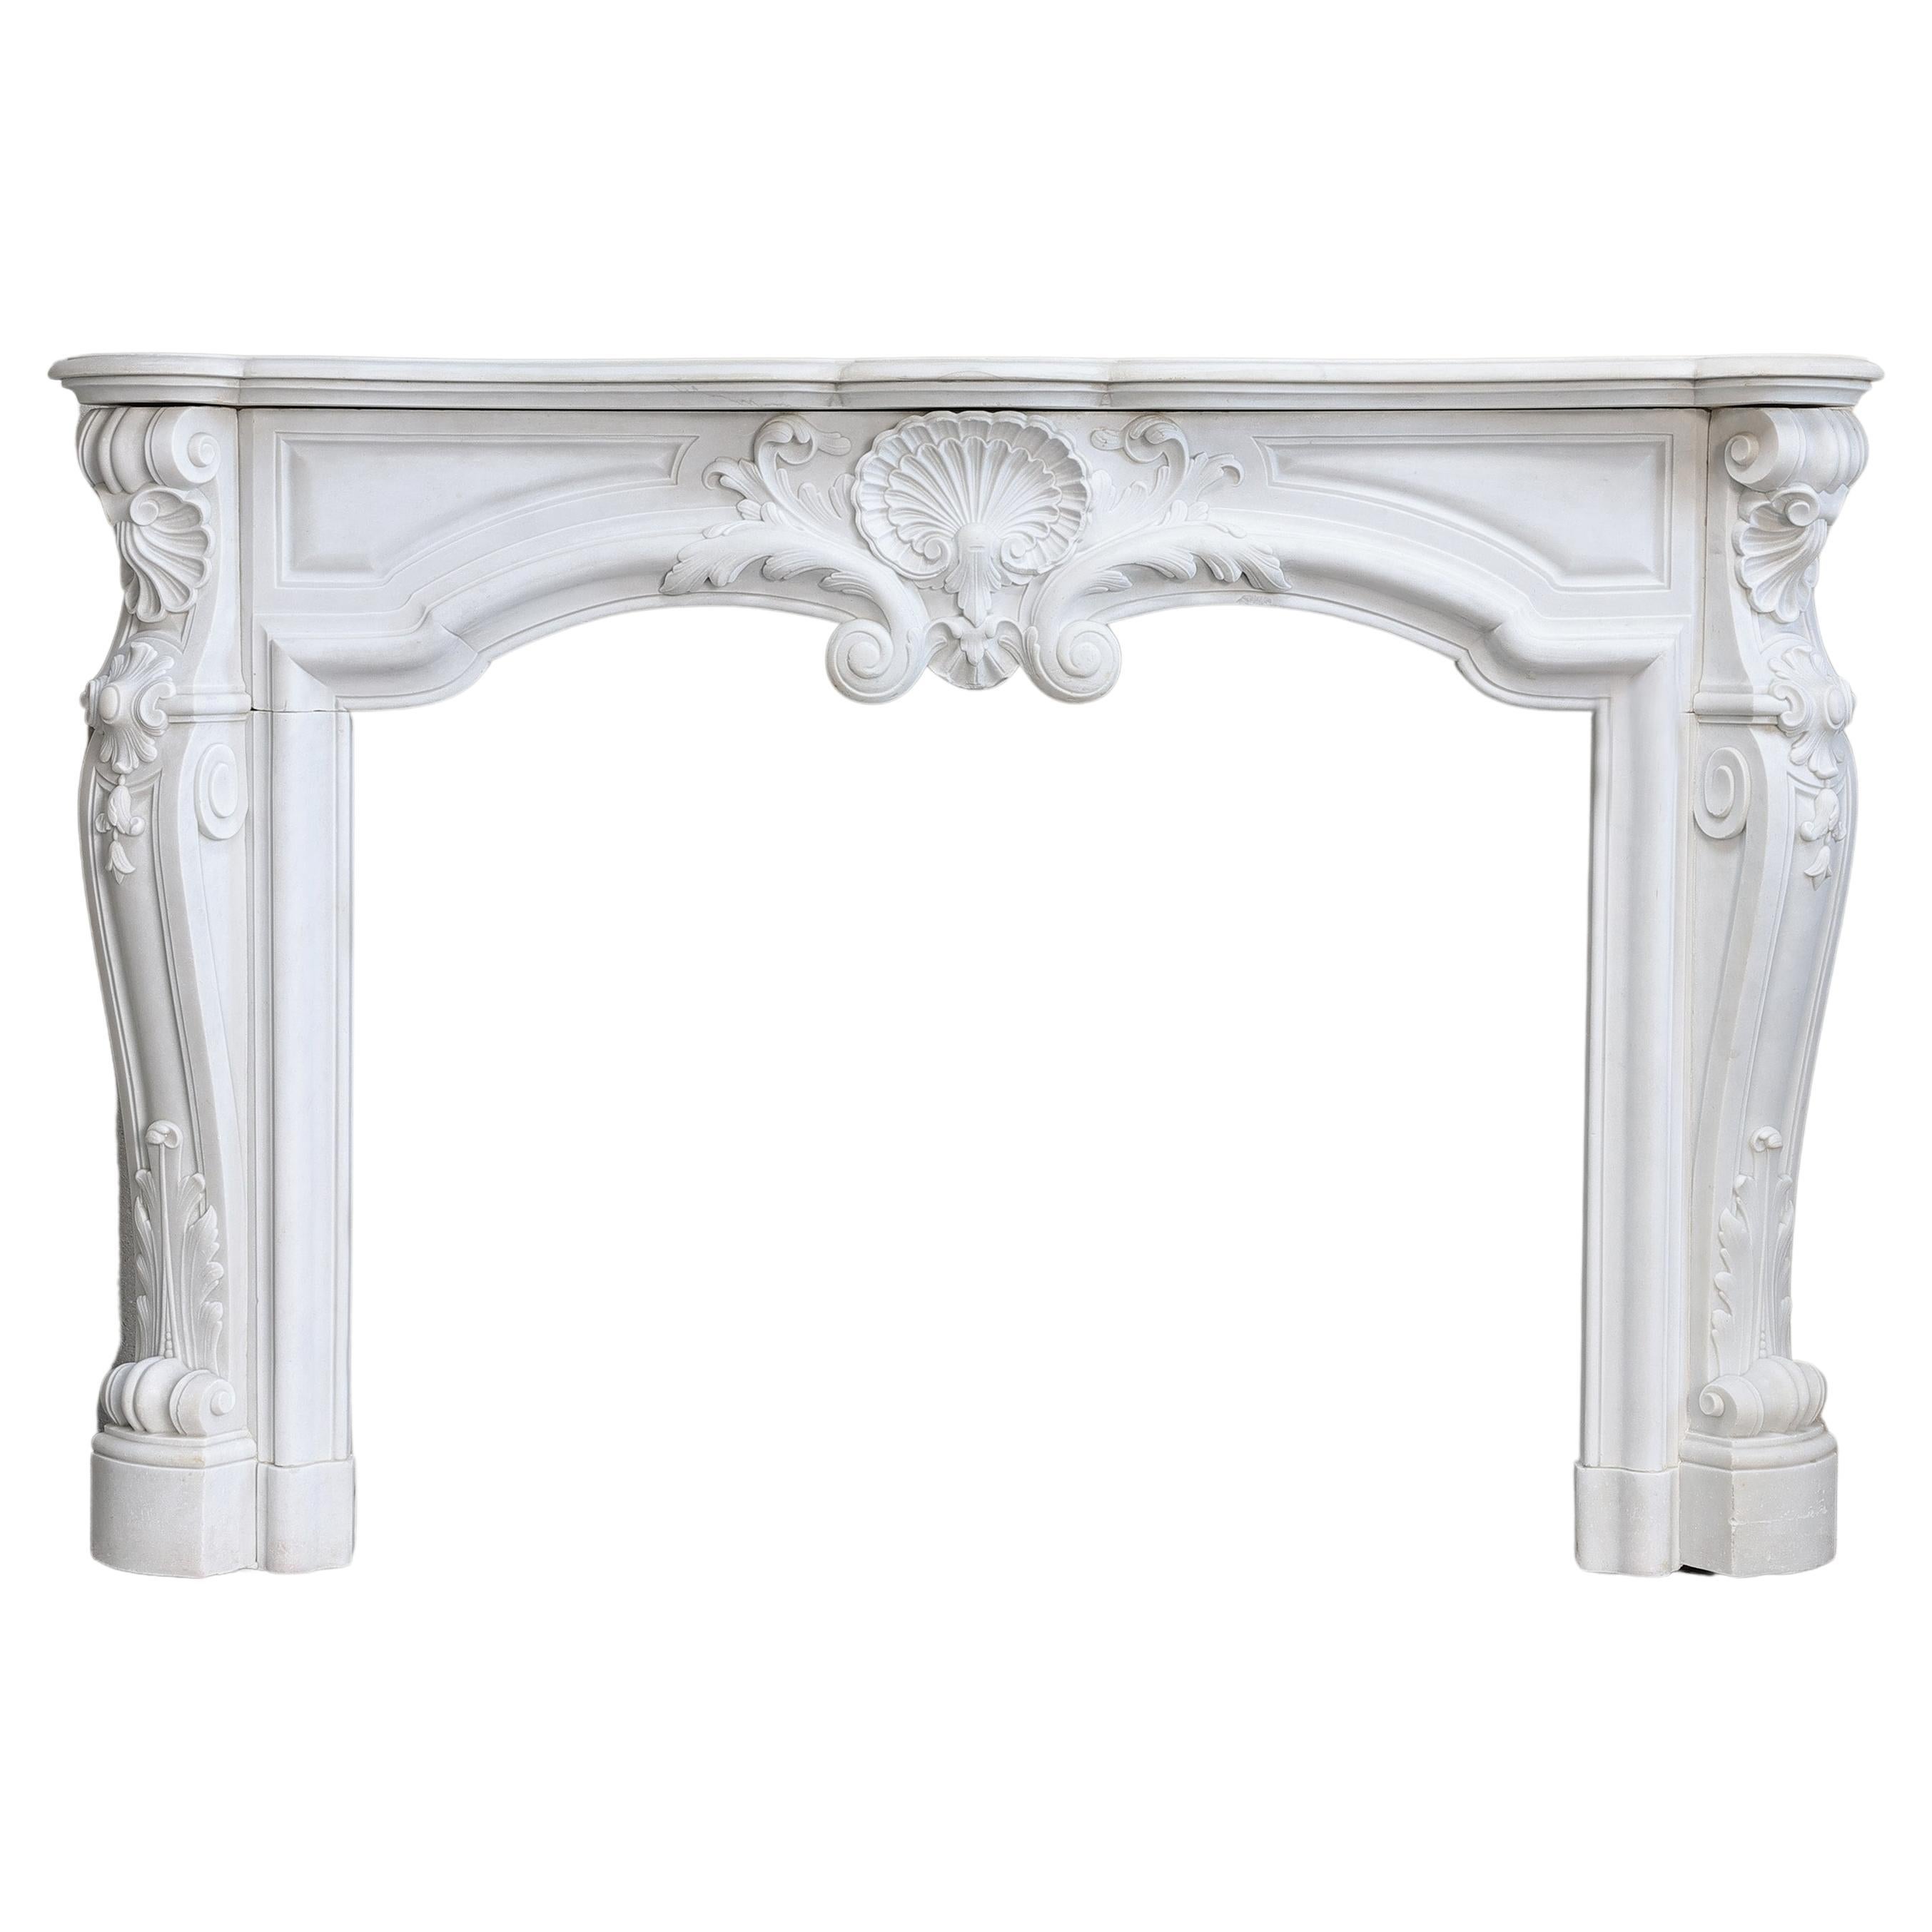 Antique Marble Fireplace Mantel For Sale